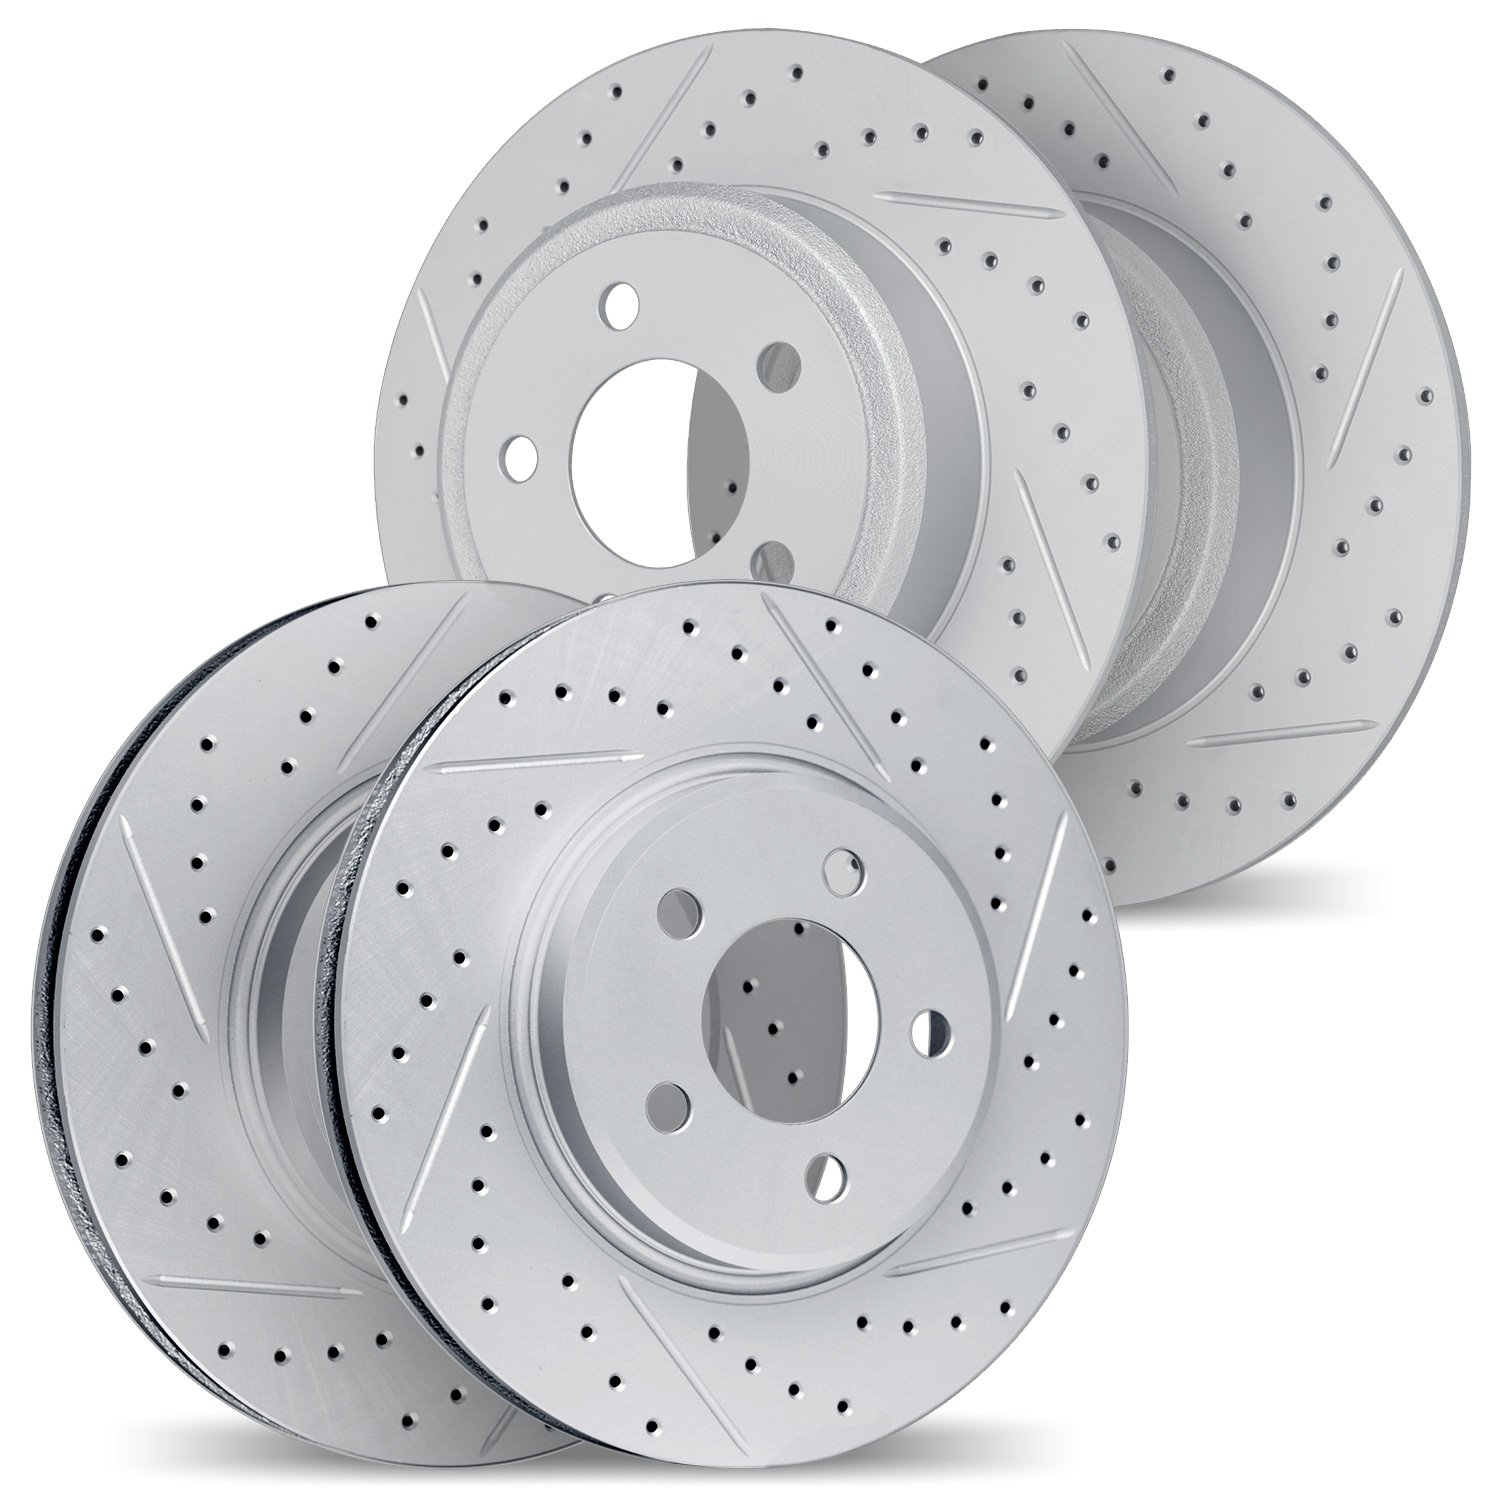 2004-03053 Geoperformance Drilled/Slotted Brake Rotors, Fits Select Kia/Hyundai/Genesis, Position: Front and Rear